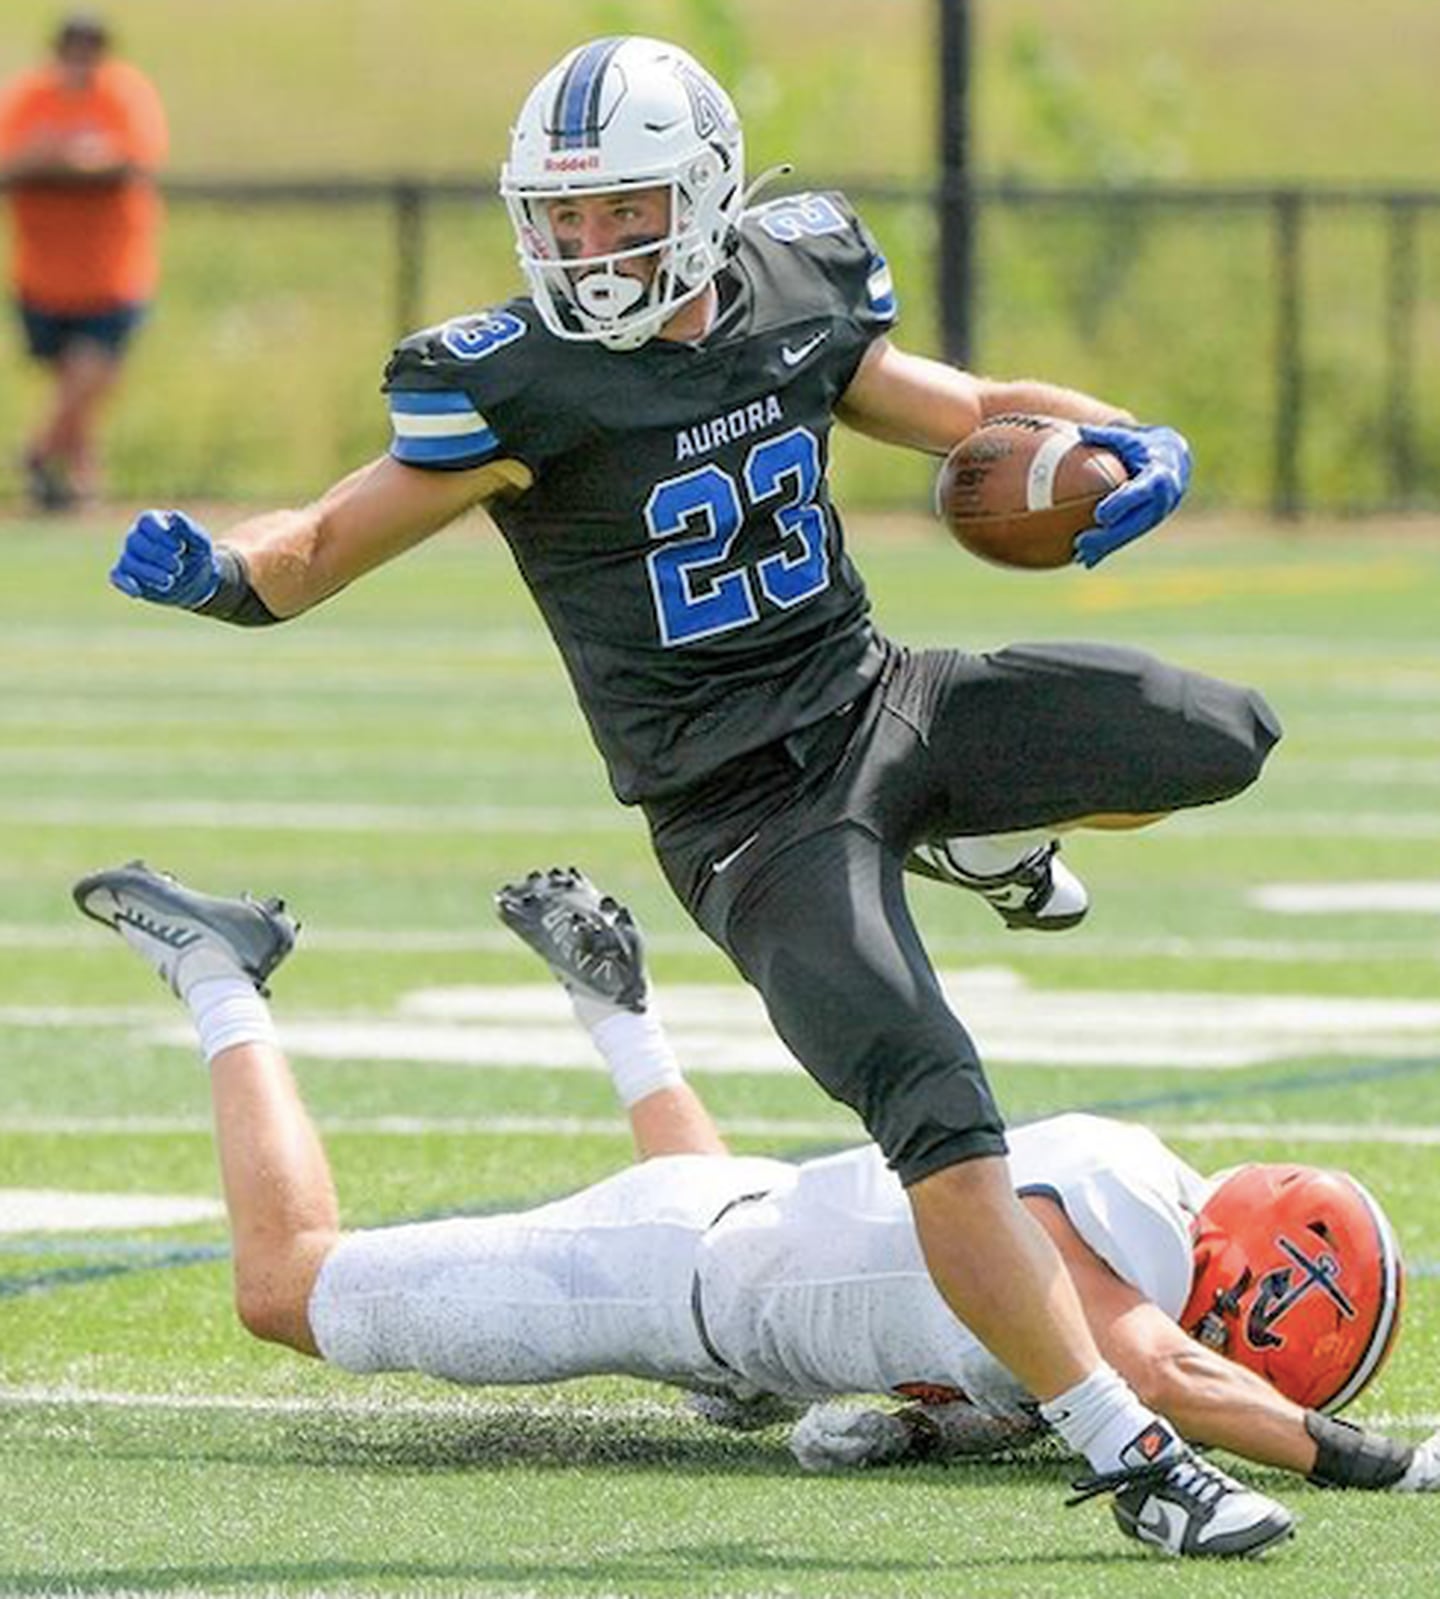 Aurora University's James Mautino of Spring Valley was named as a First-Team All-American by D3football.com and a Second-Team All-American by the Associated Press.